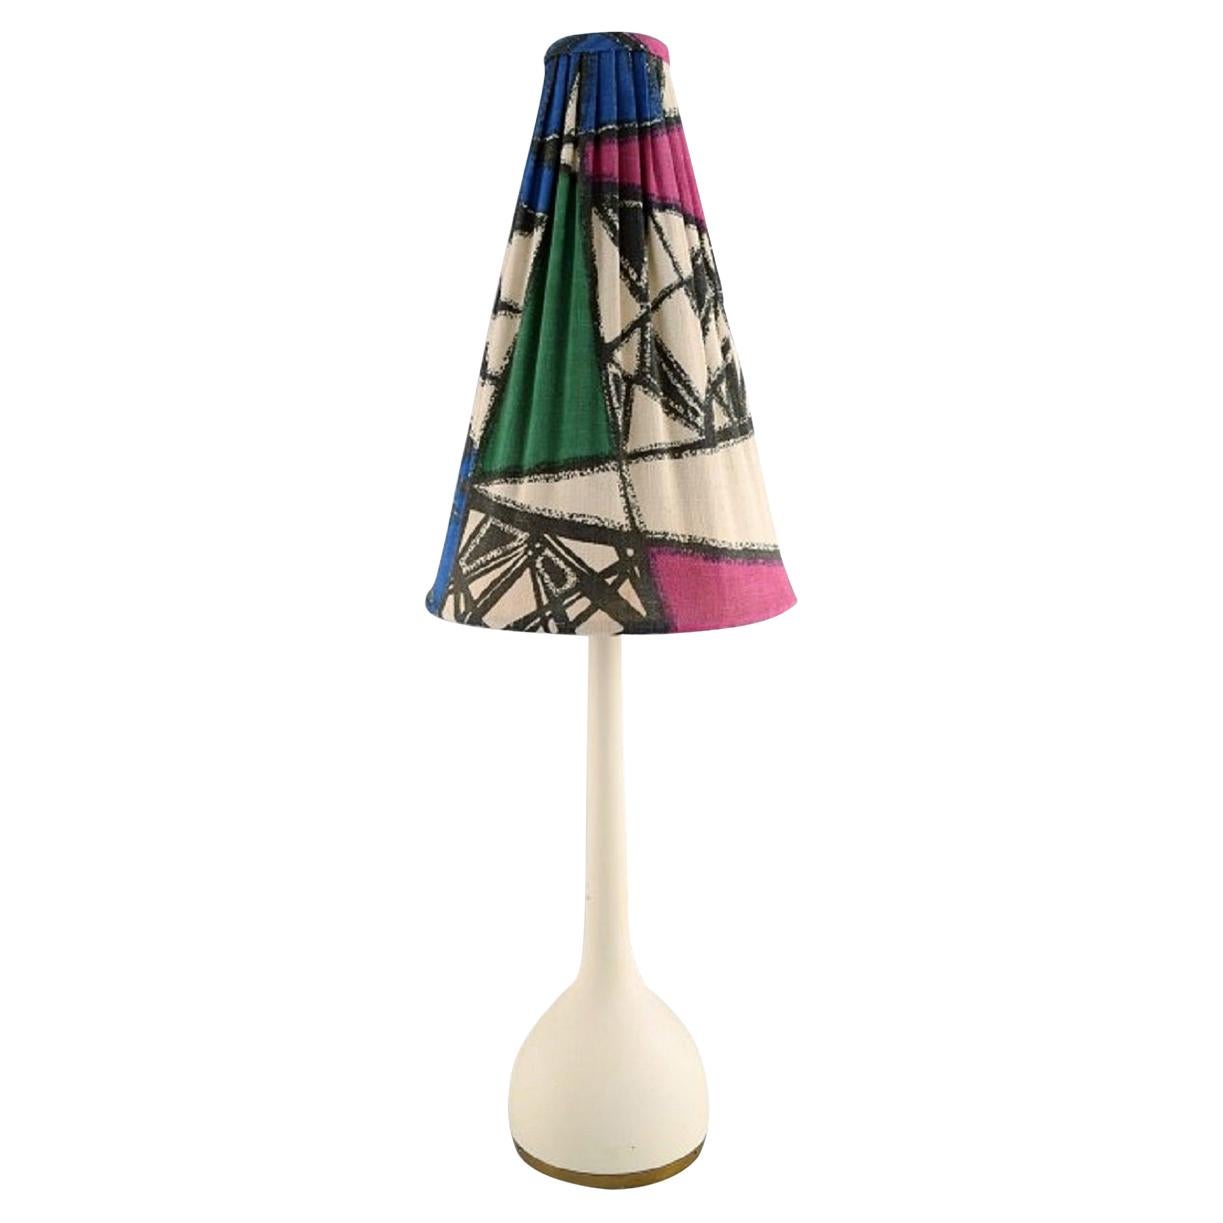 Hans-Agne Jakobsson for A / B Markaryd, Table Lamp with Colorful Shade, 1960's For Sale